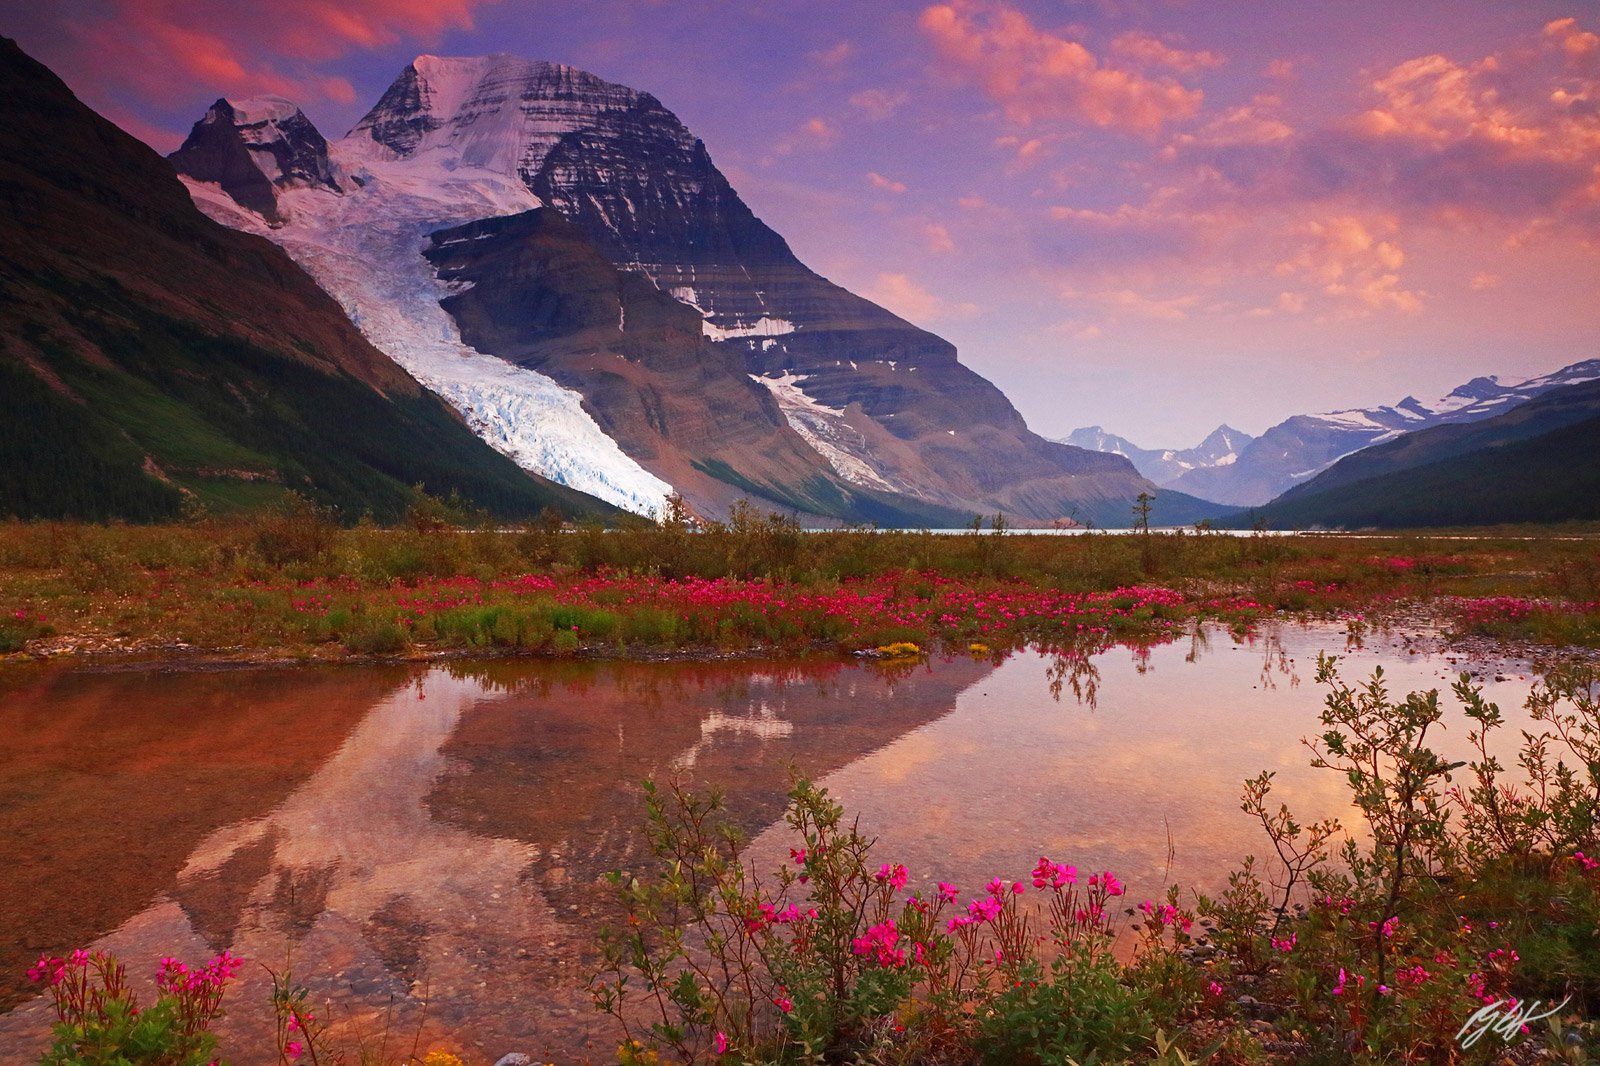 Sunset Mt Robson and Berg Lake in Mt Robson Provincial Park, Canada